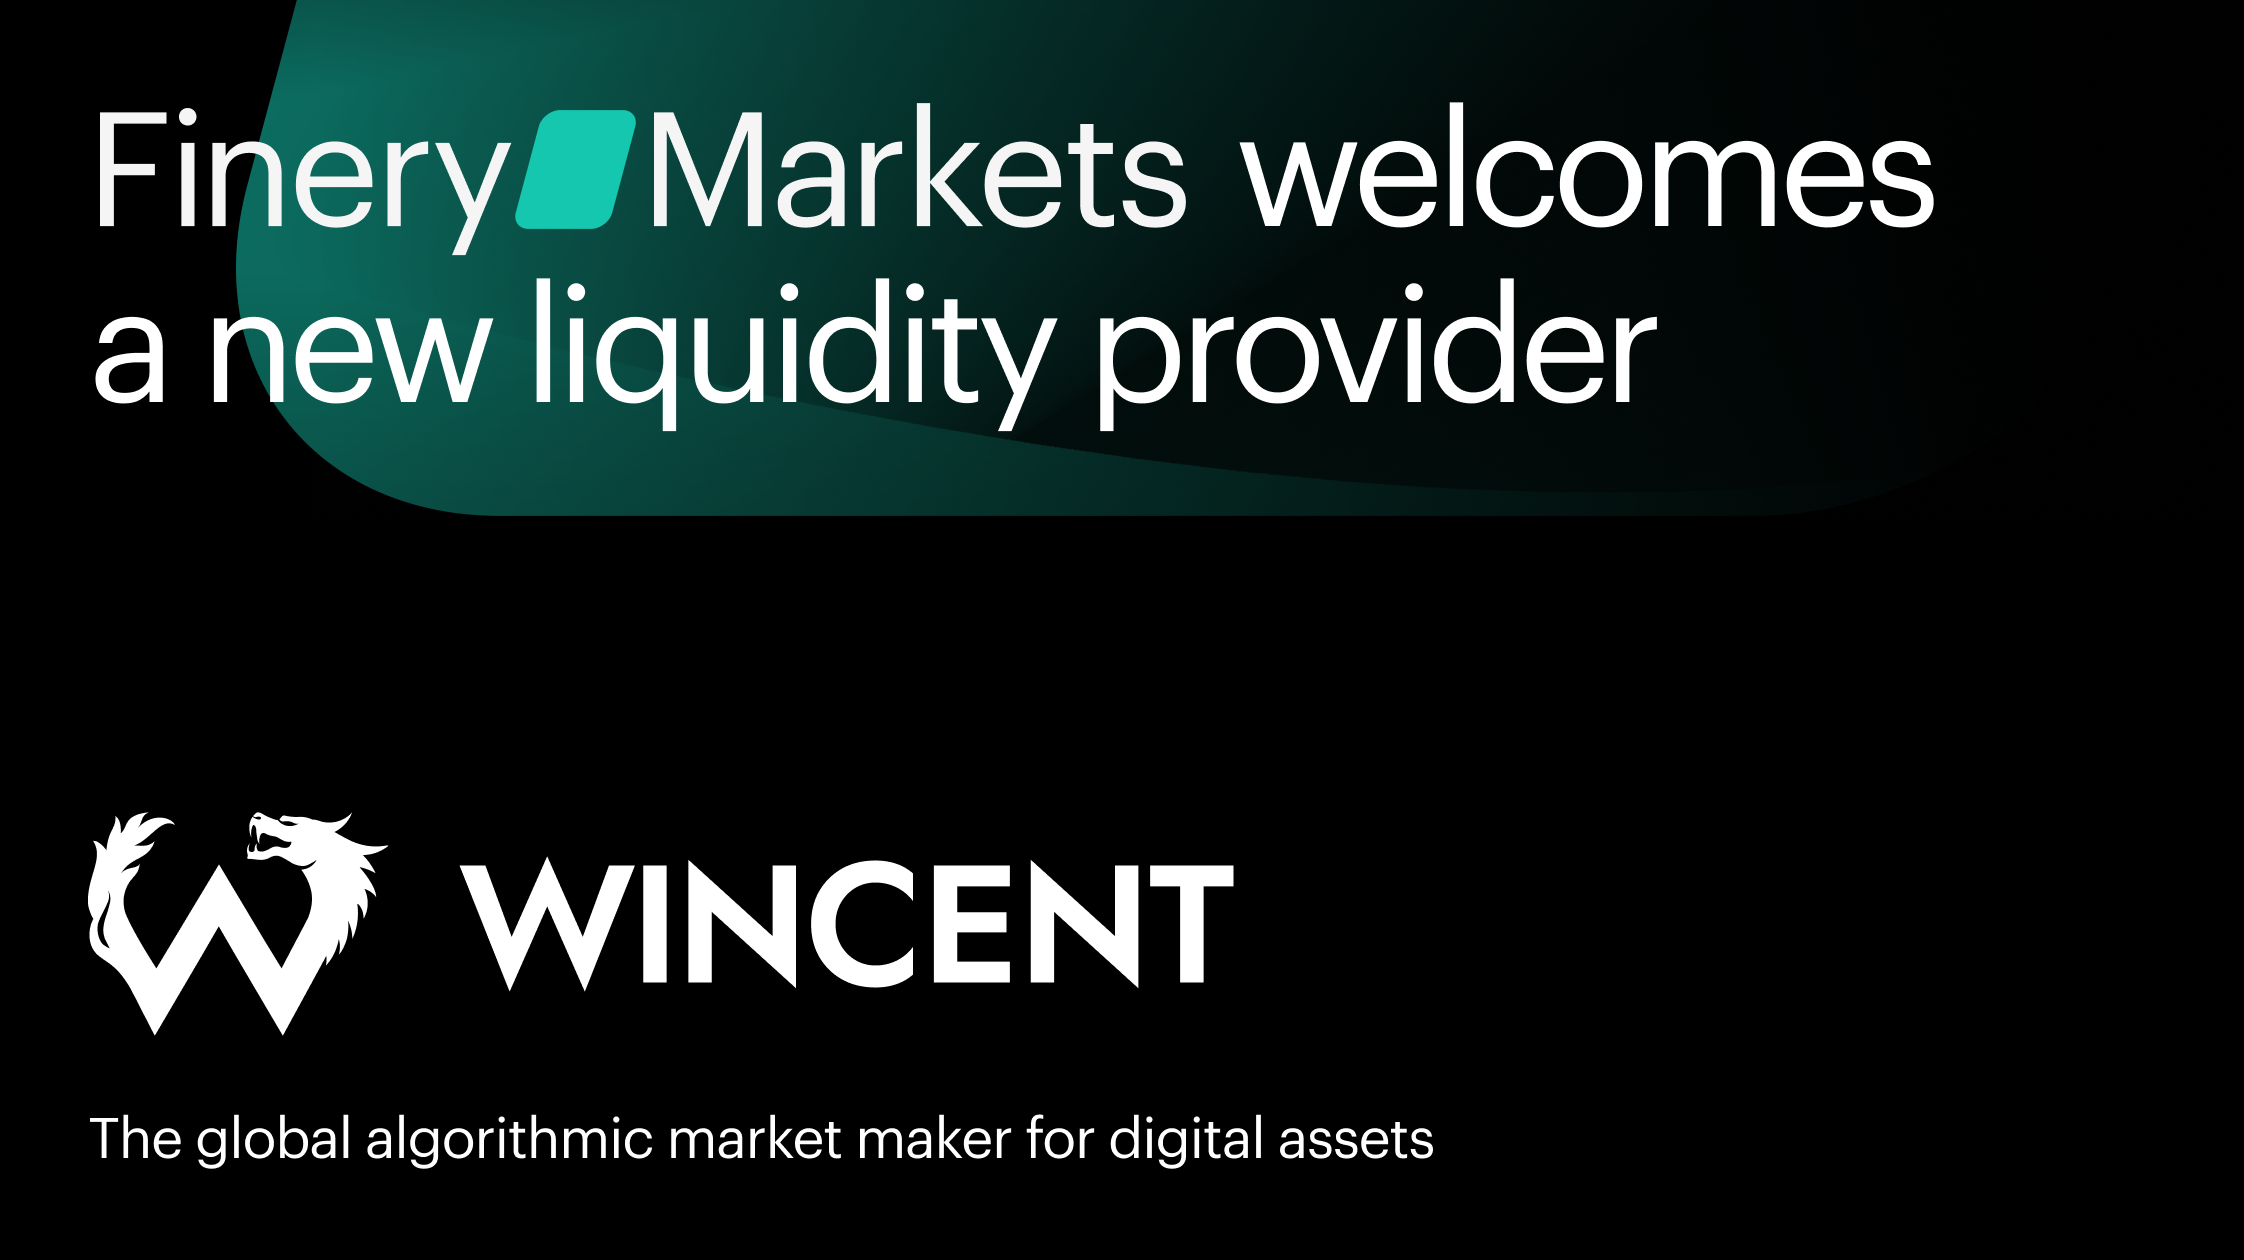 Finery Markets welcomes a new liquidity provider